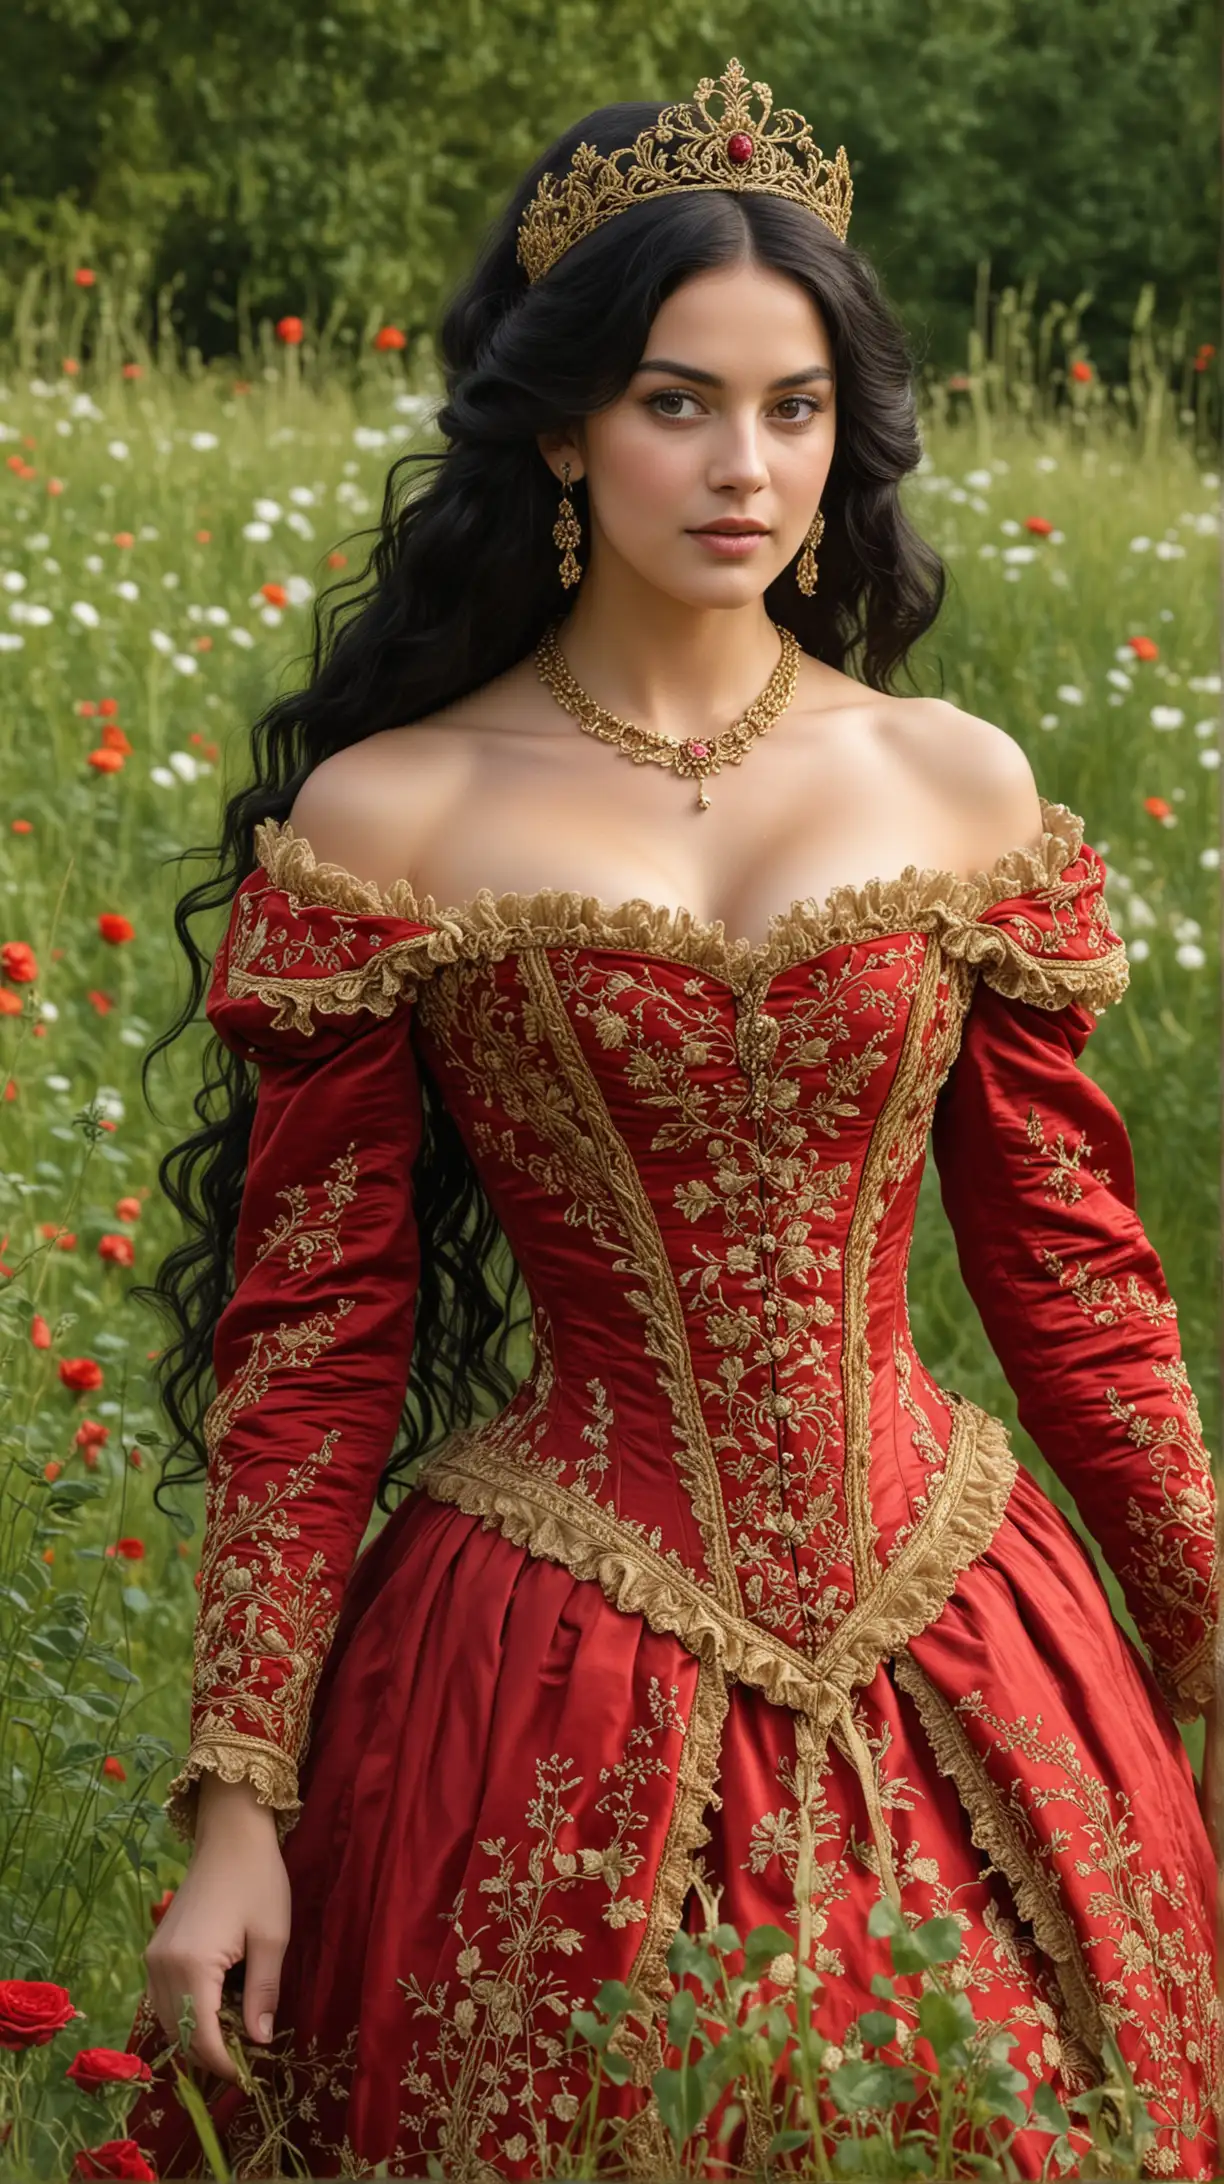 19th Century Princess in Red Dress with Golden Crown and Roses